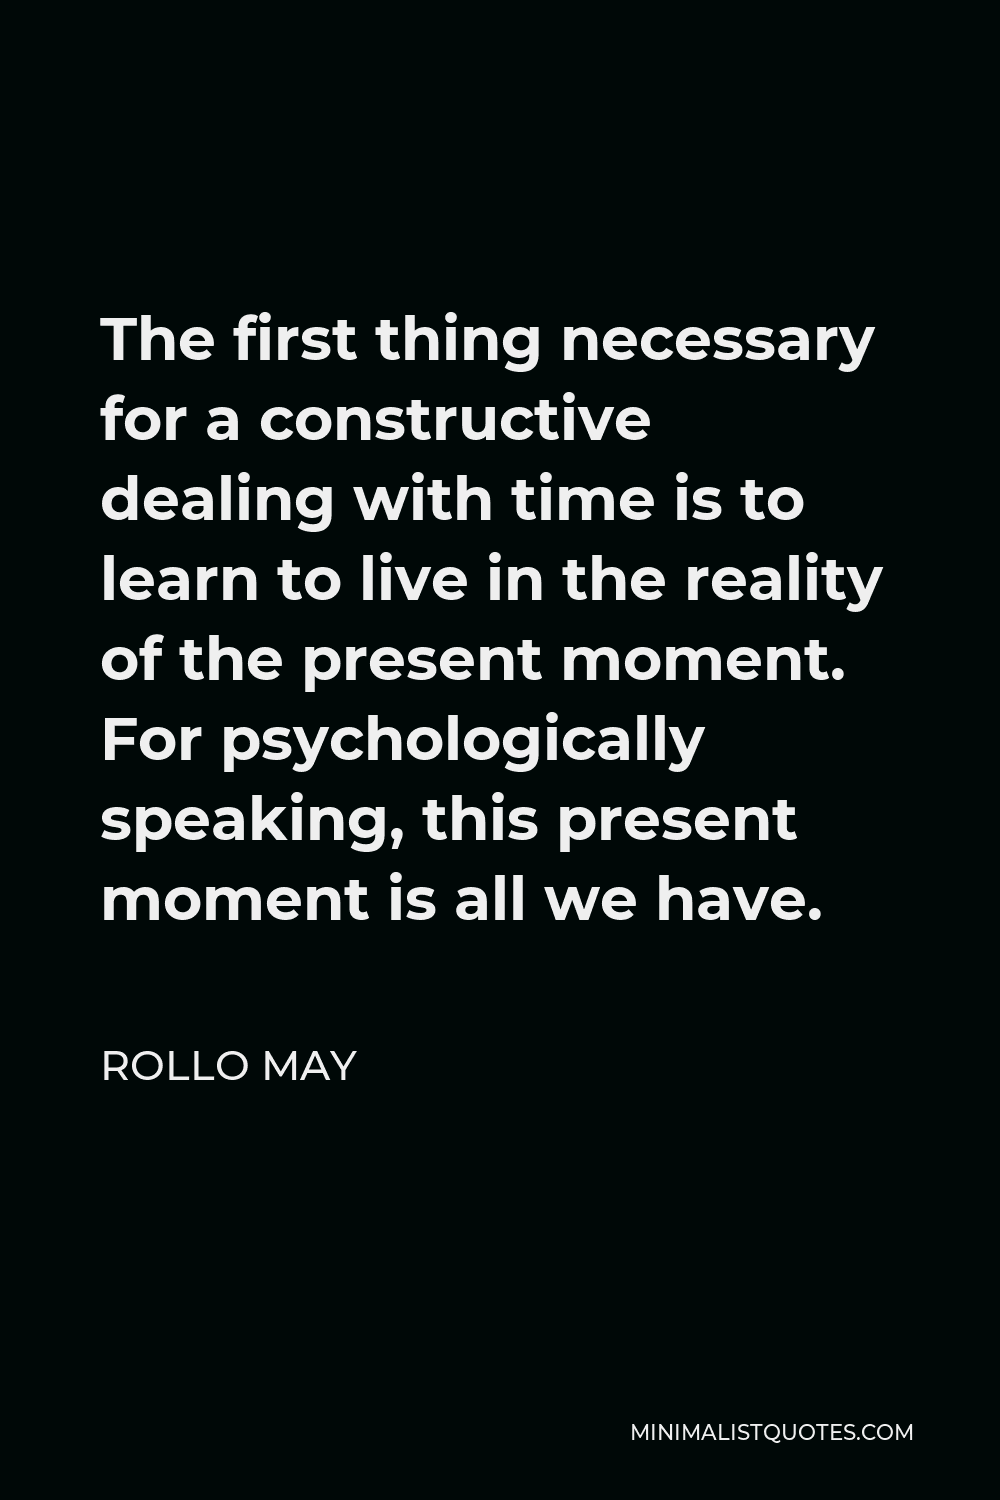 Rollo May Quote - The first thing necessary for a constructive dealing with time is to learn to live in the reality of the present moment. For psychologically speaking, this present moment is all we have.